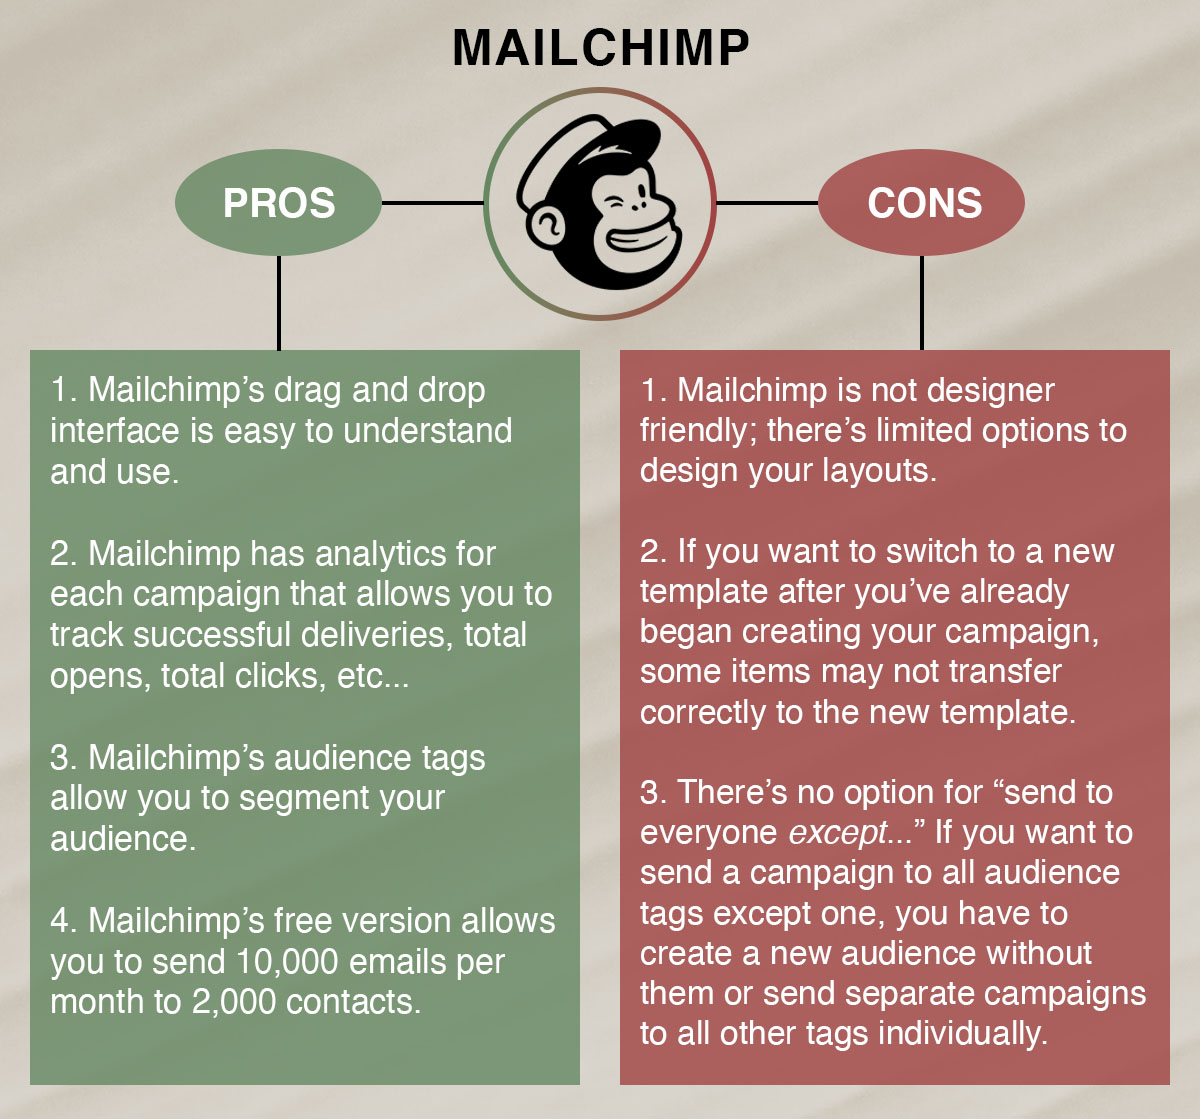 pros and cons of Mailchimp